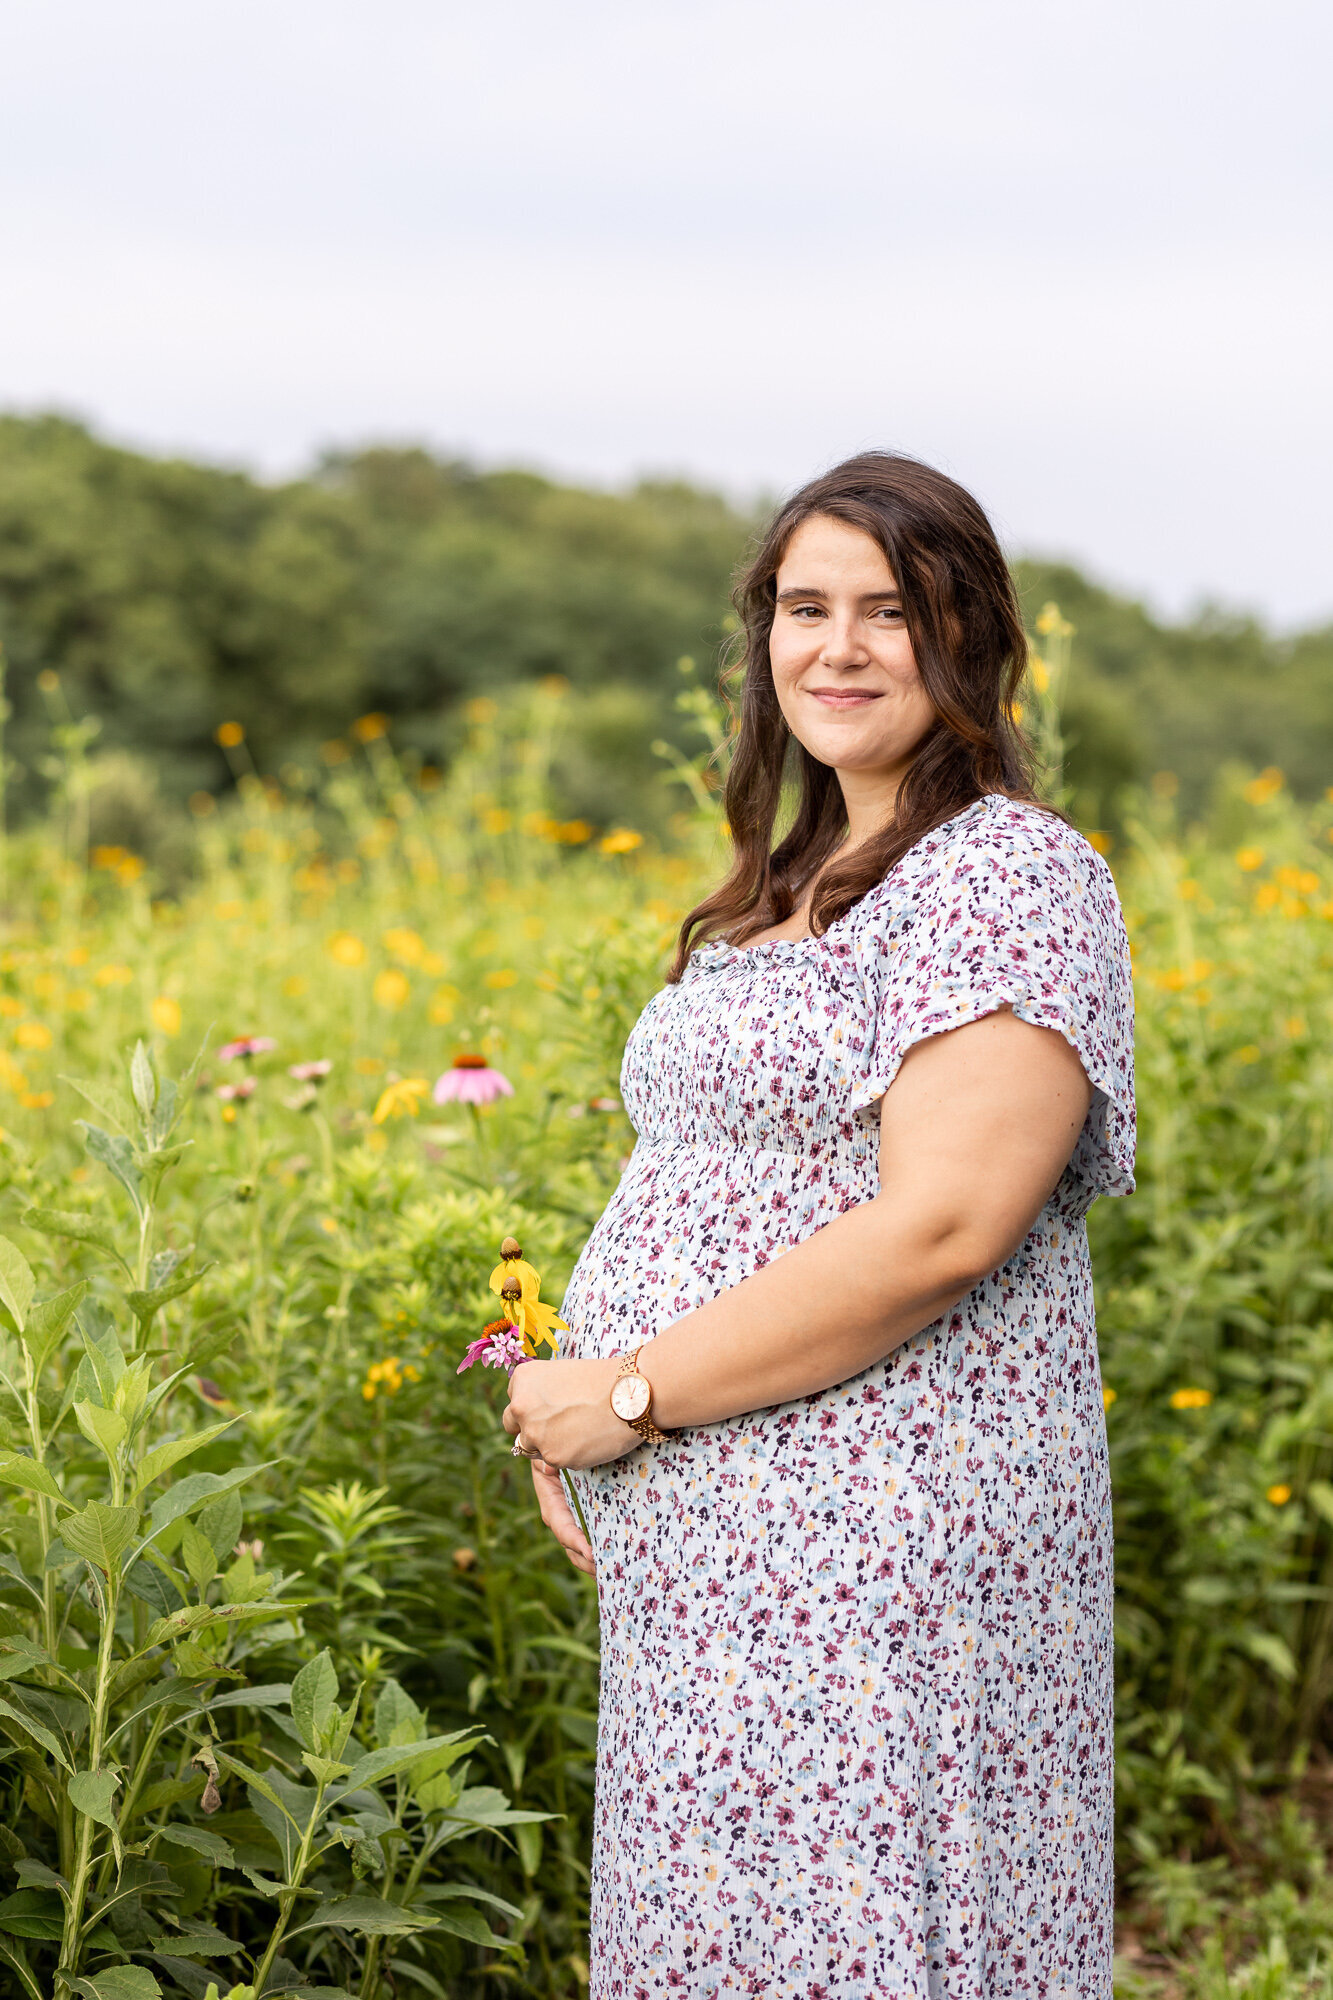 Outdoor-maternity-photography-session-golden-hour-Frankfort-KY-4